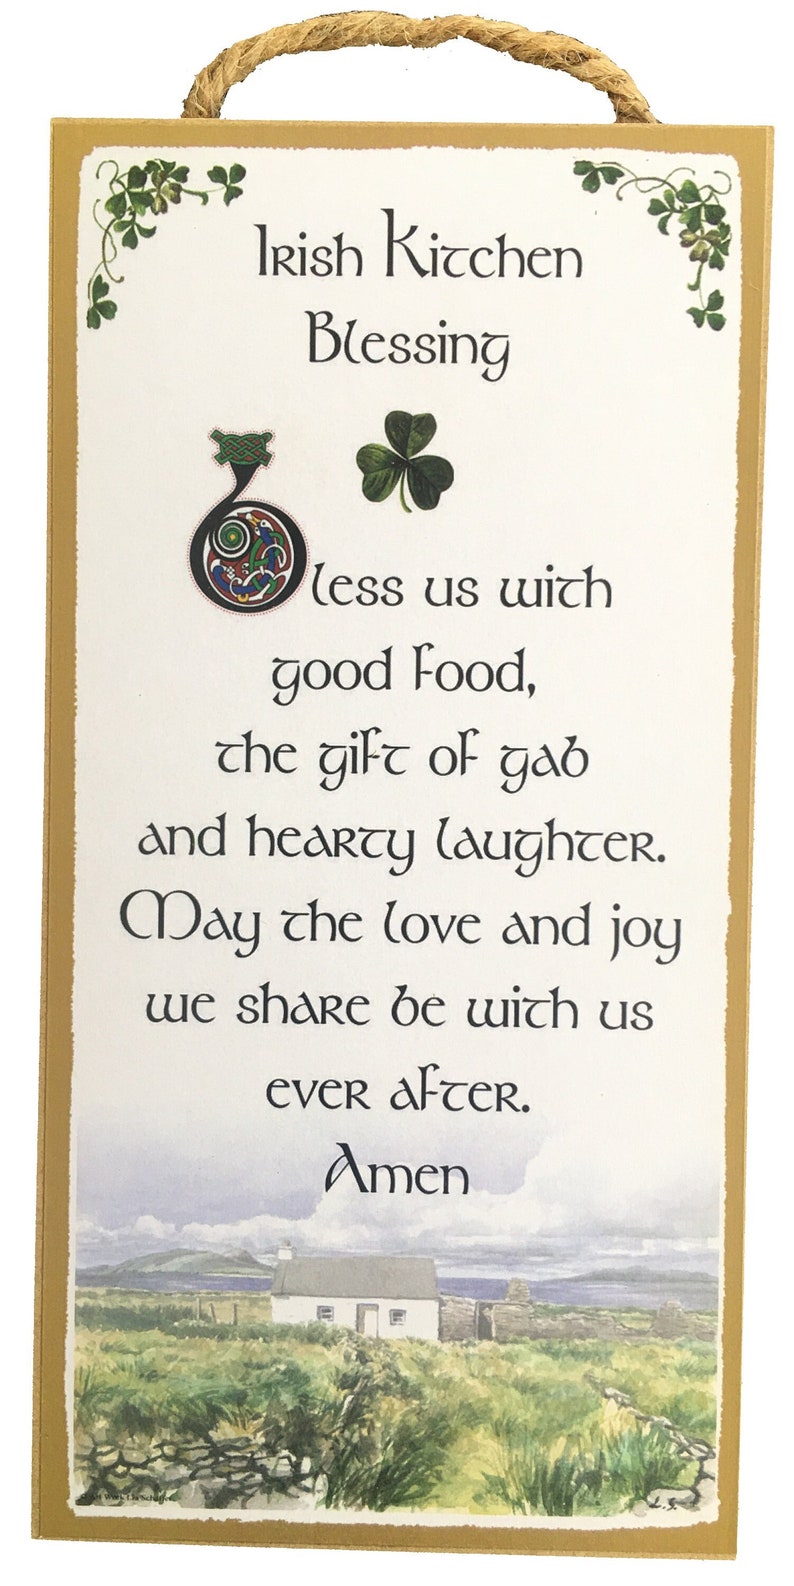 Bless Us with Good Food Irish Kitchen Blessing 5x10 Inch Hanging Wooden Plaque image 1